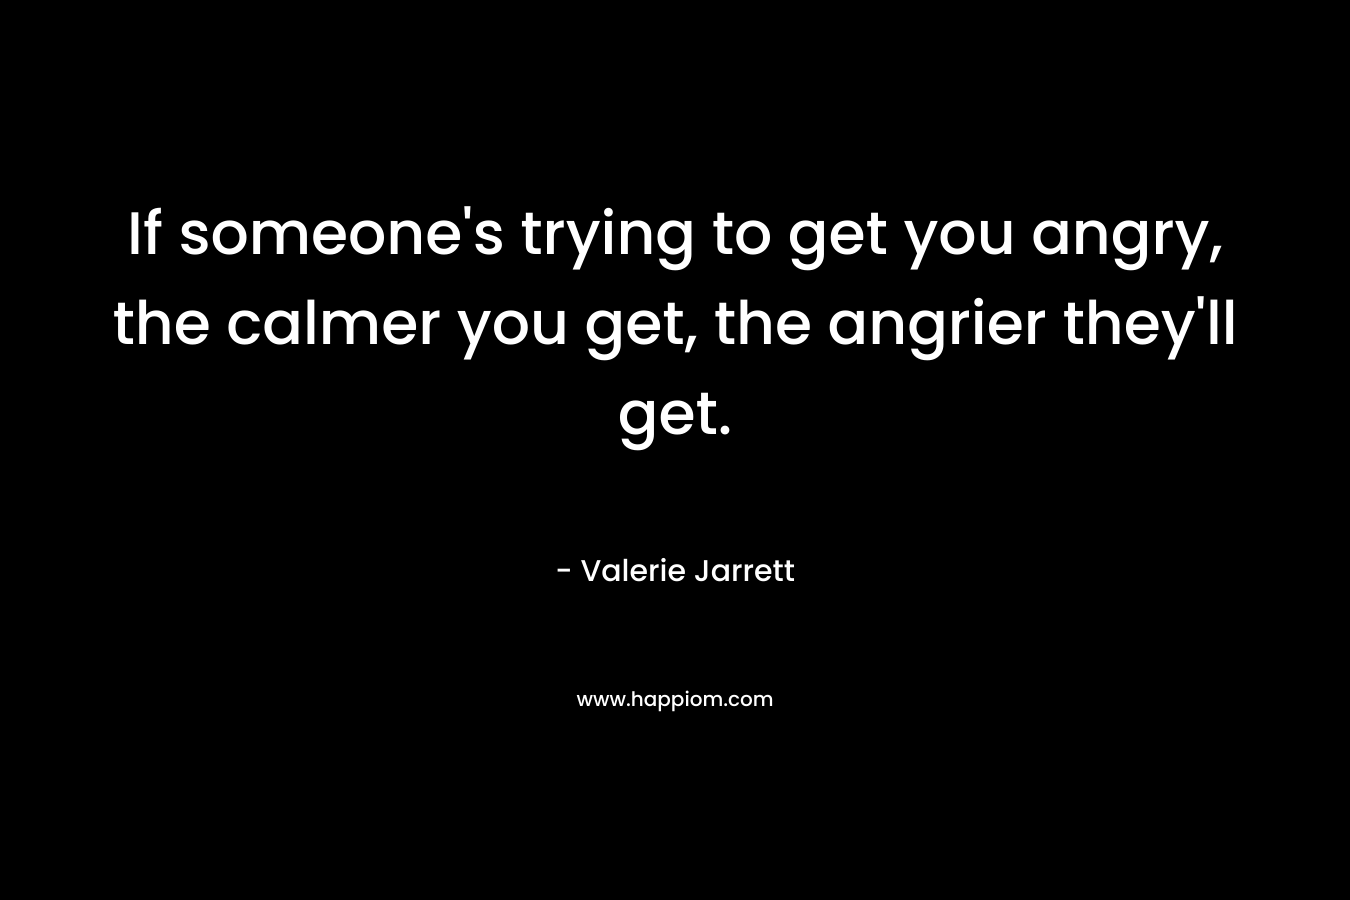 If someone's trying to get you angry, the calmer you get, the angrier they'll get.